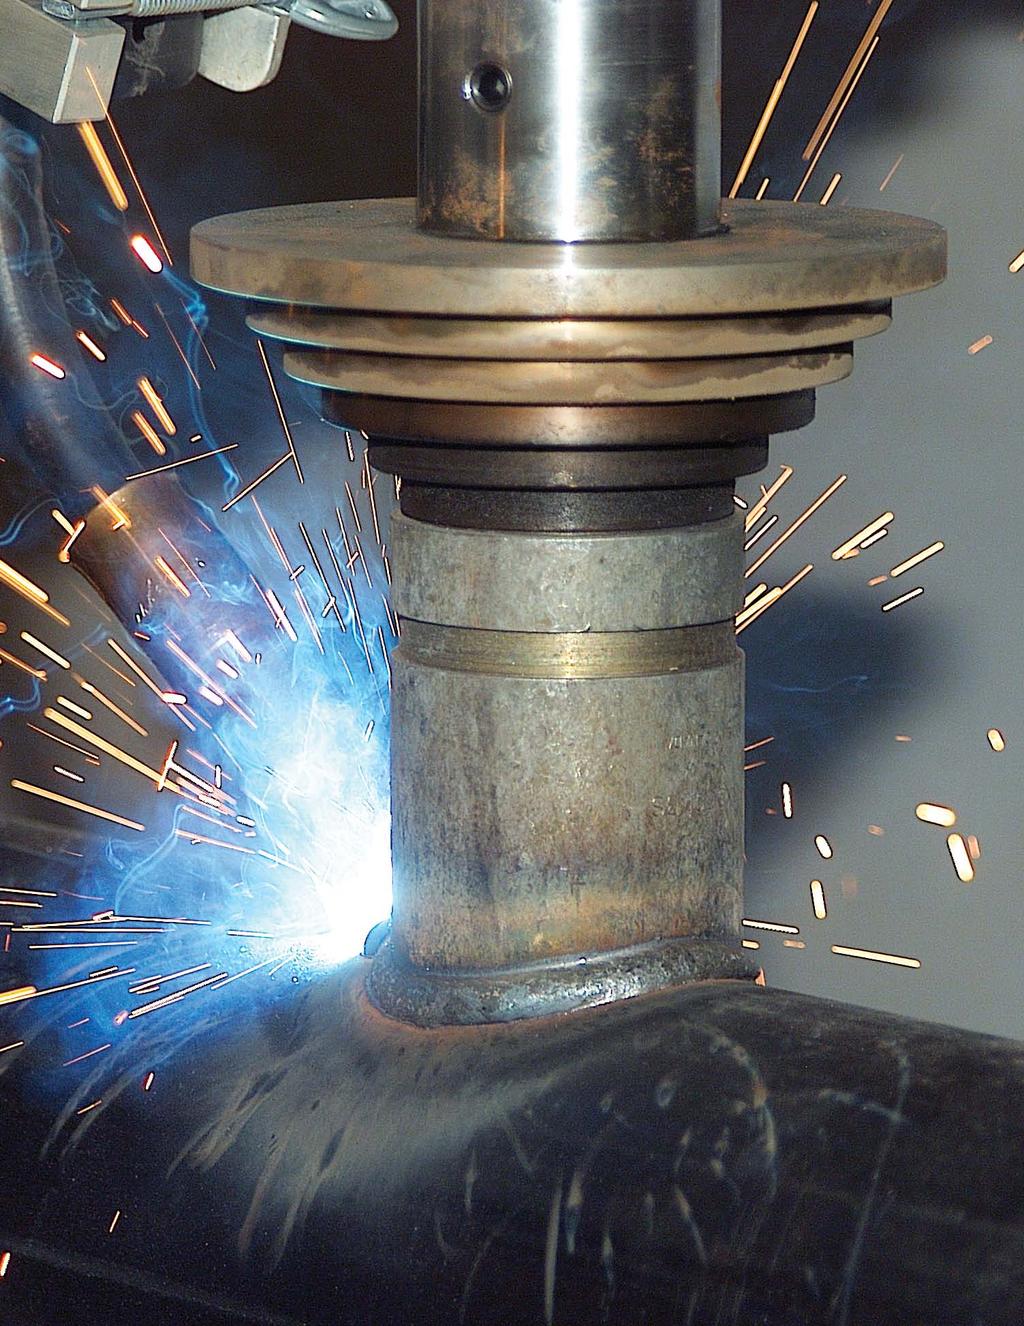 AUTOMATIC CIRCLE BURNING AND WELDING ON PIPE AND PRESSURE VESSELS No Hose or Cable Wrap-up Regardless of Direction of Rotation. Oxy-Fuel, Plasma Cutting and Welding Units Available.